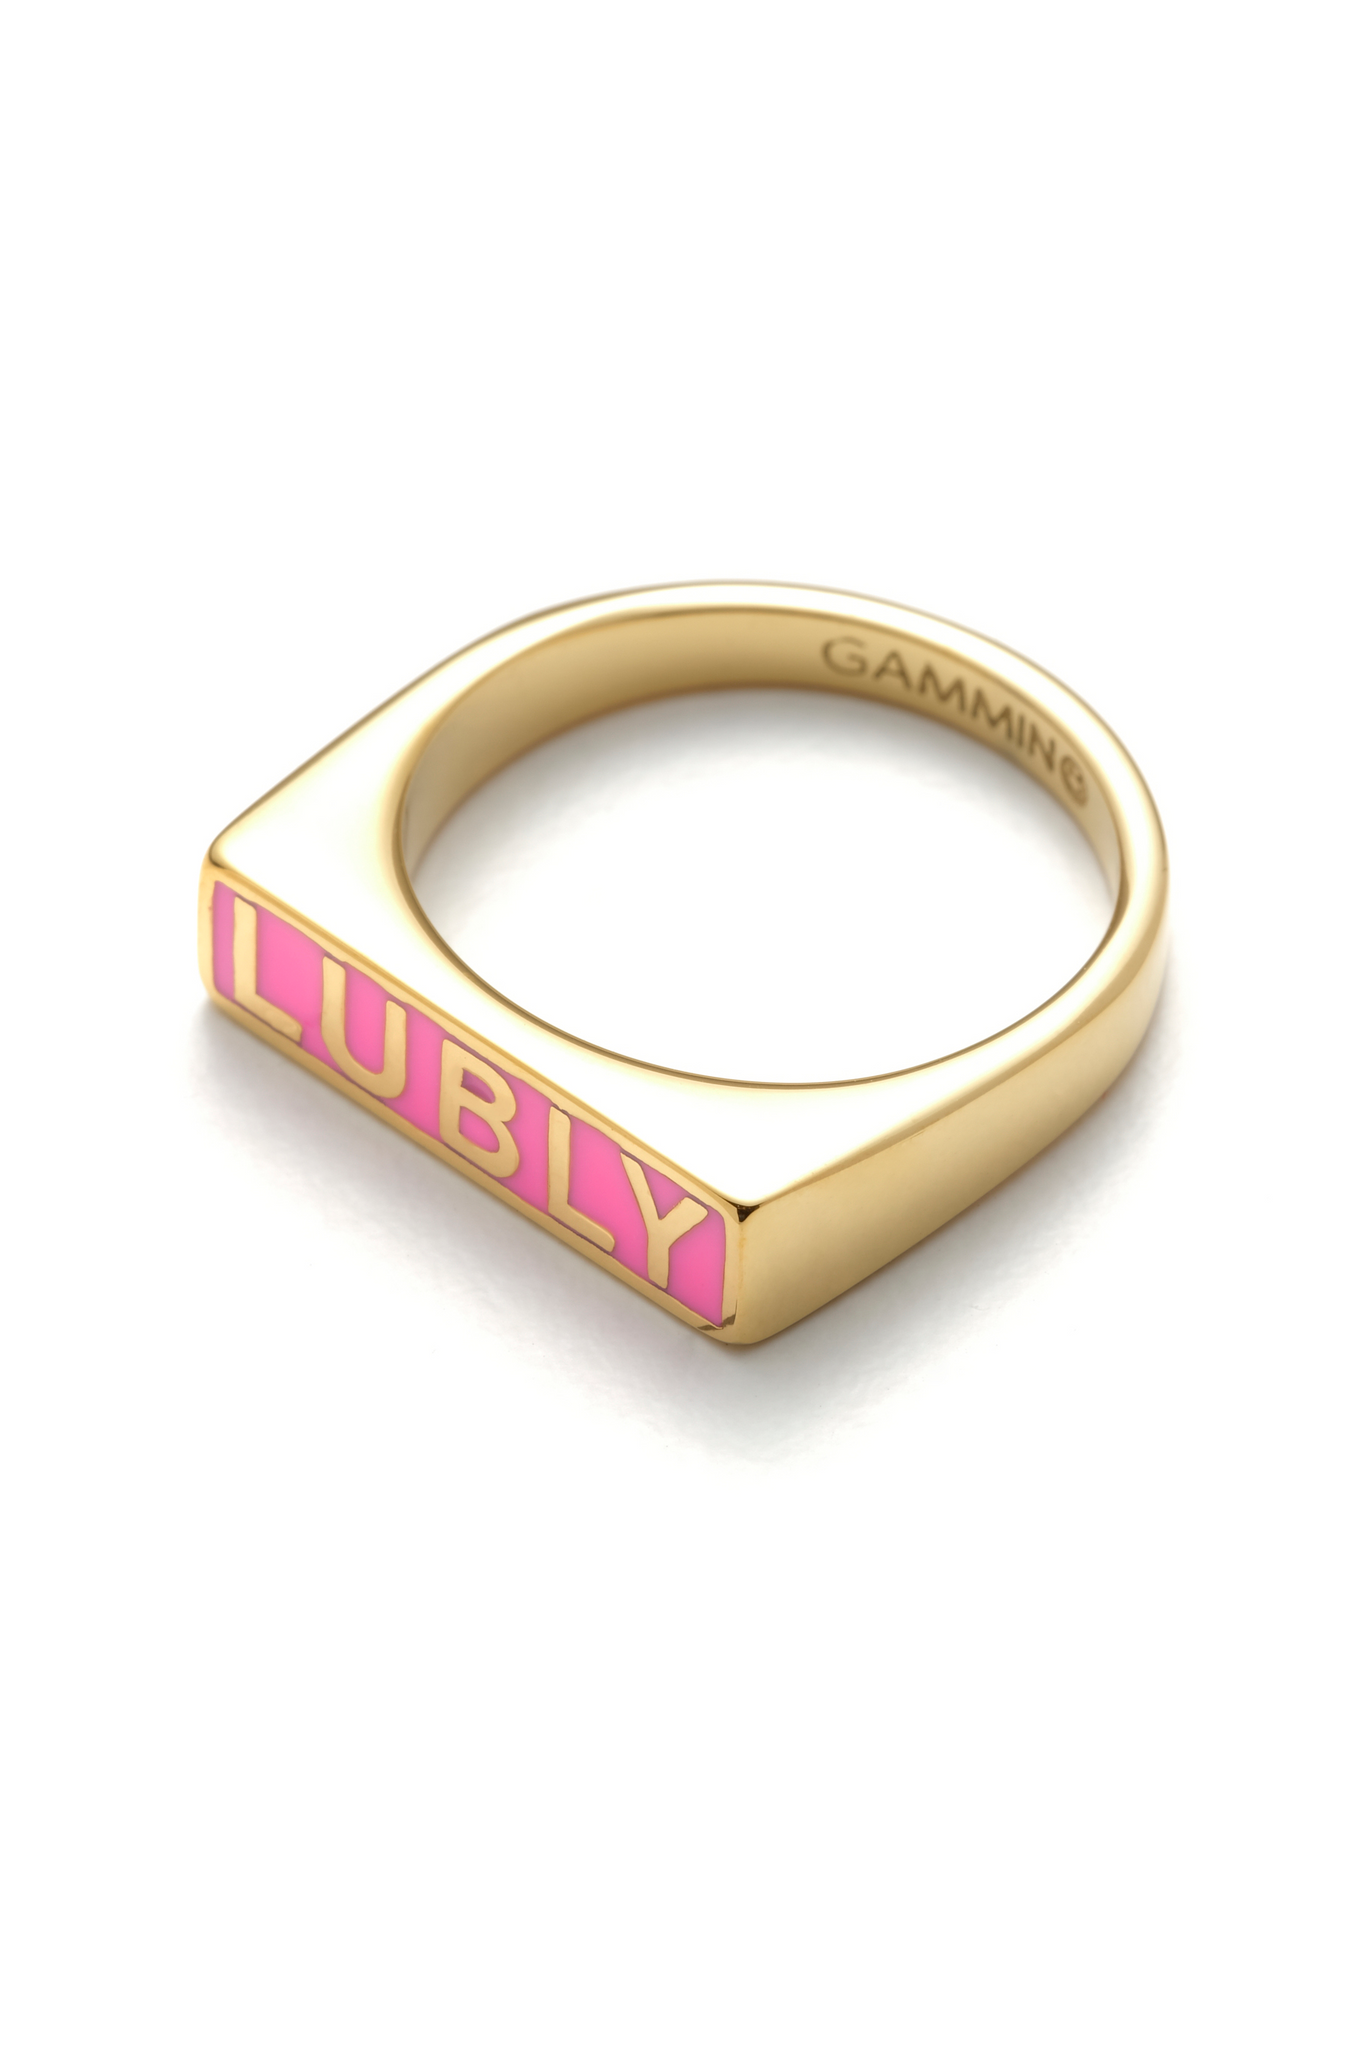 Lubly stacker ring